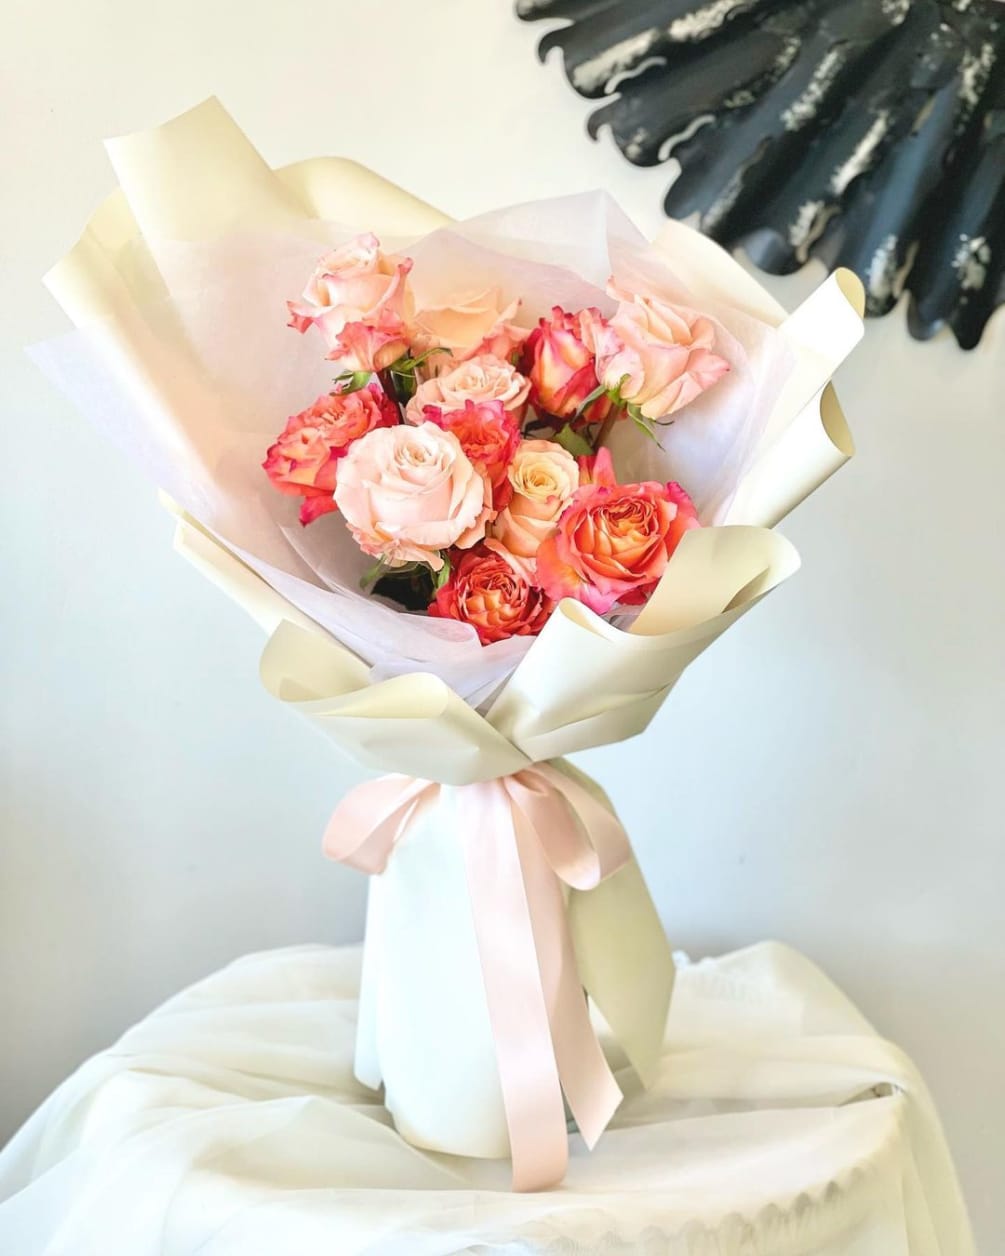 Pretty in Pink Roses 
This lovely bouquet was custom-made for any special